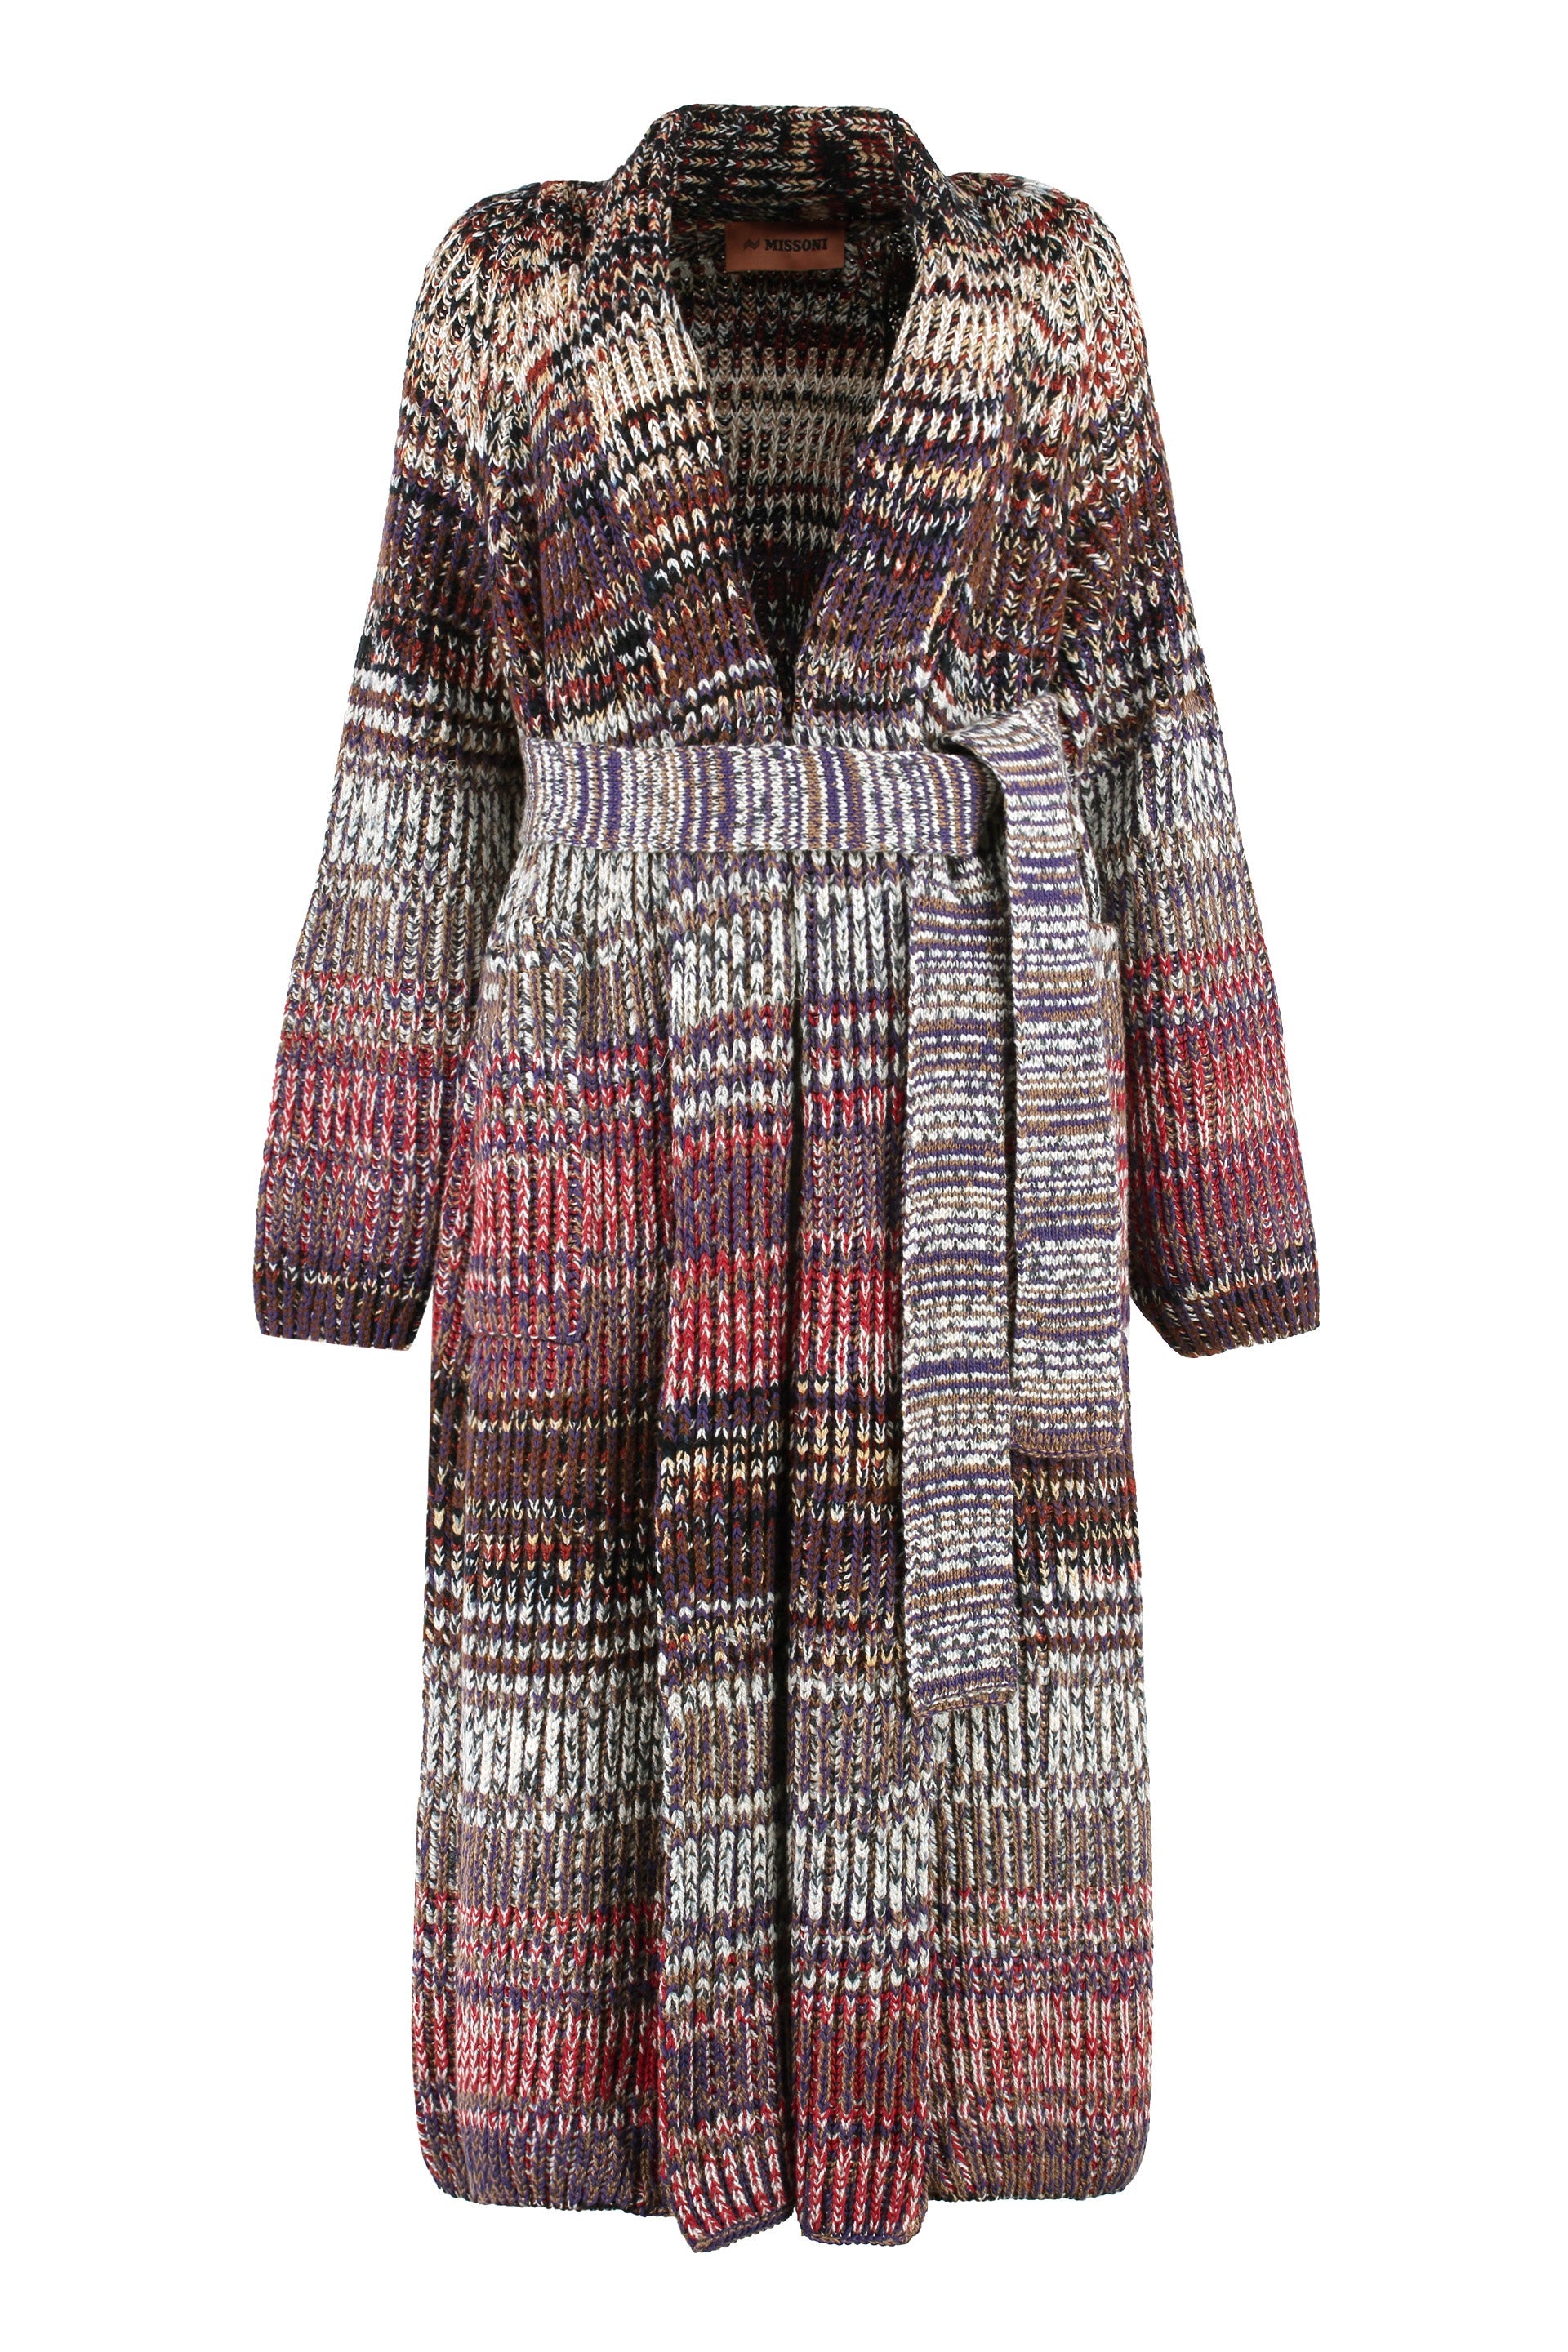 Missoni-OUTLET-SALE-Ribbed-knit-cardigan-Strick-XS-ARCHIVE-COLLECTION.jpg